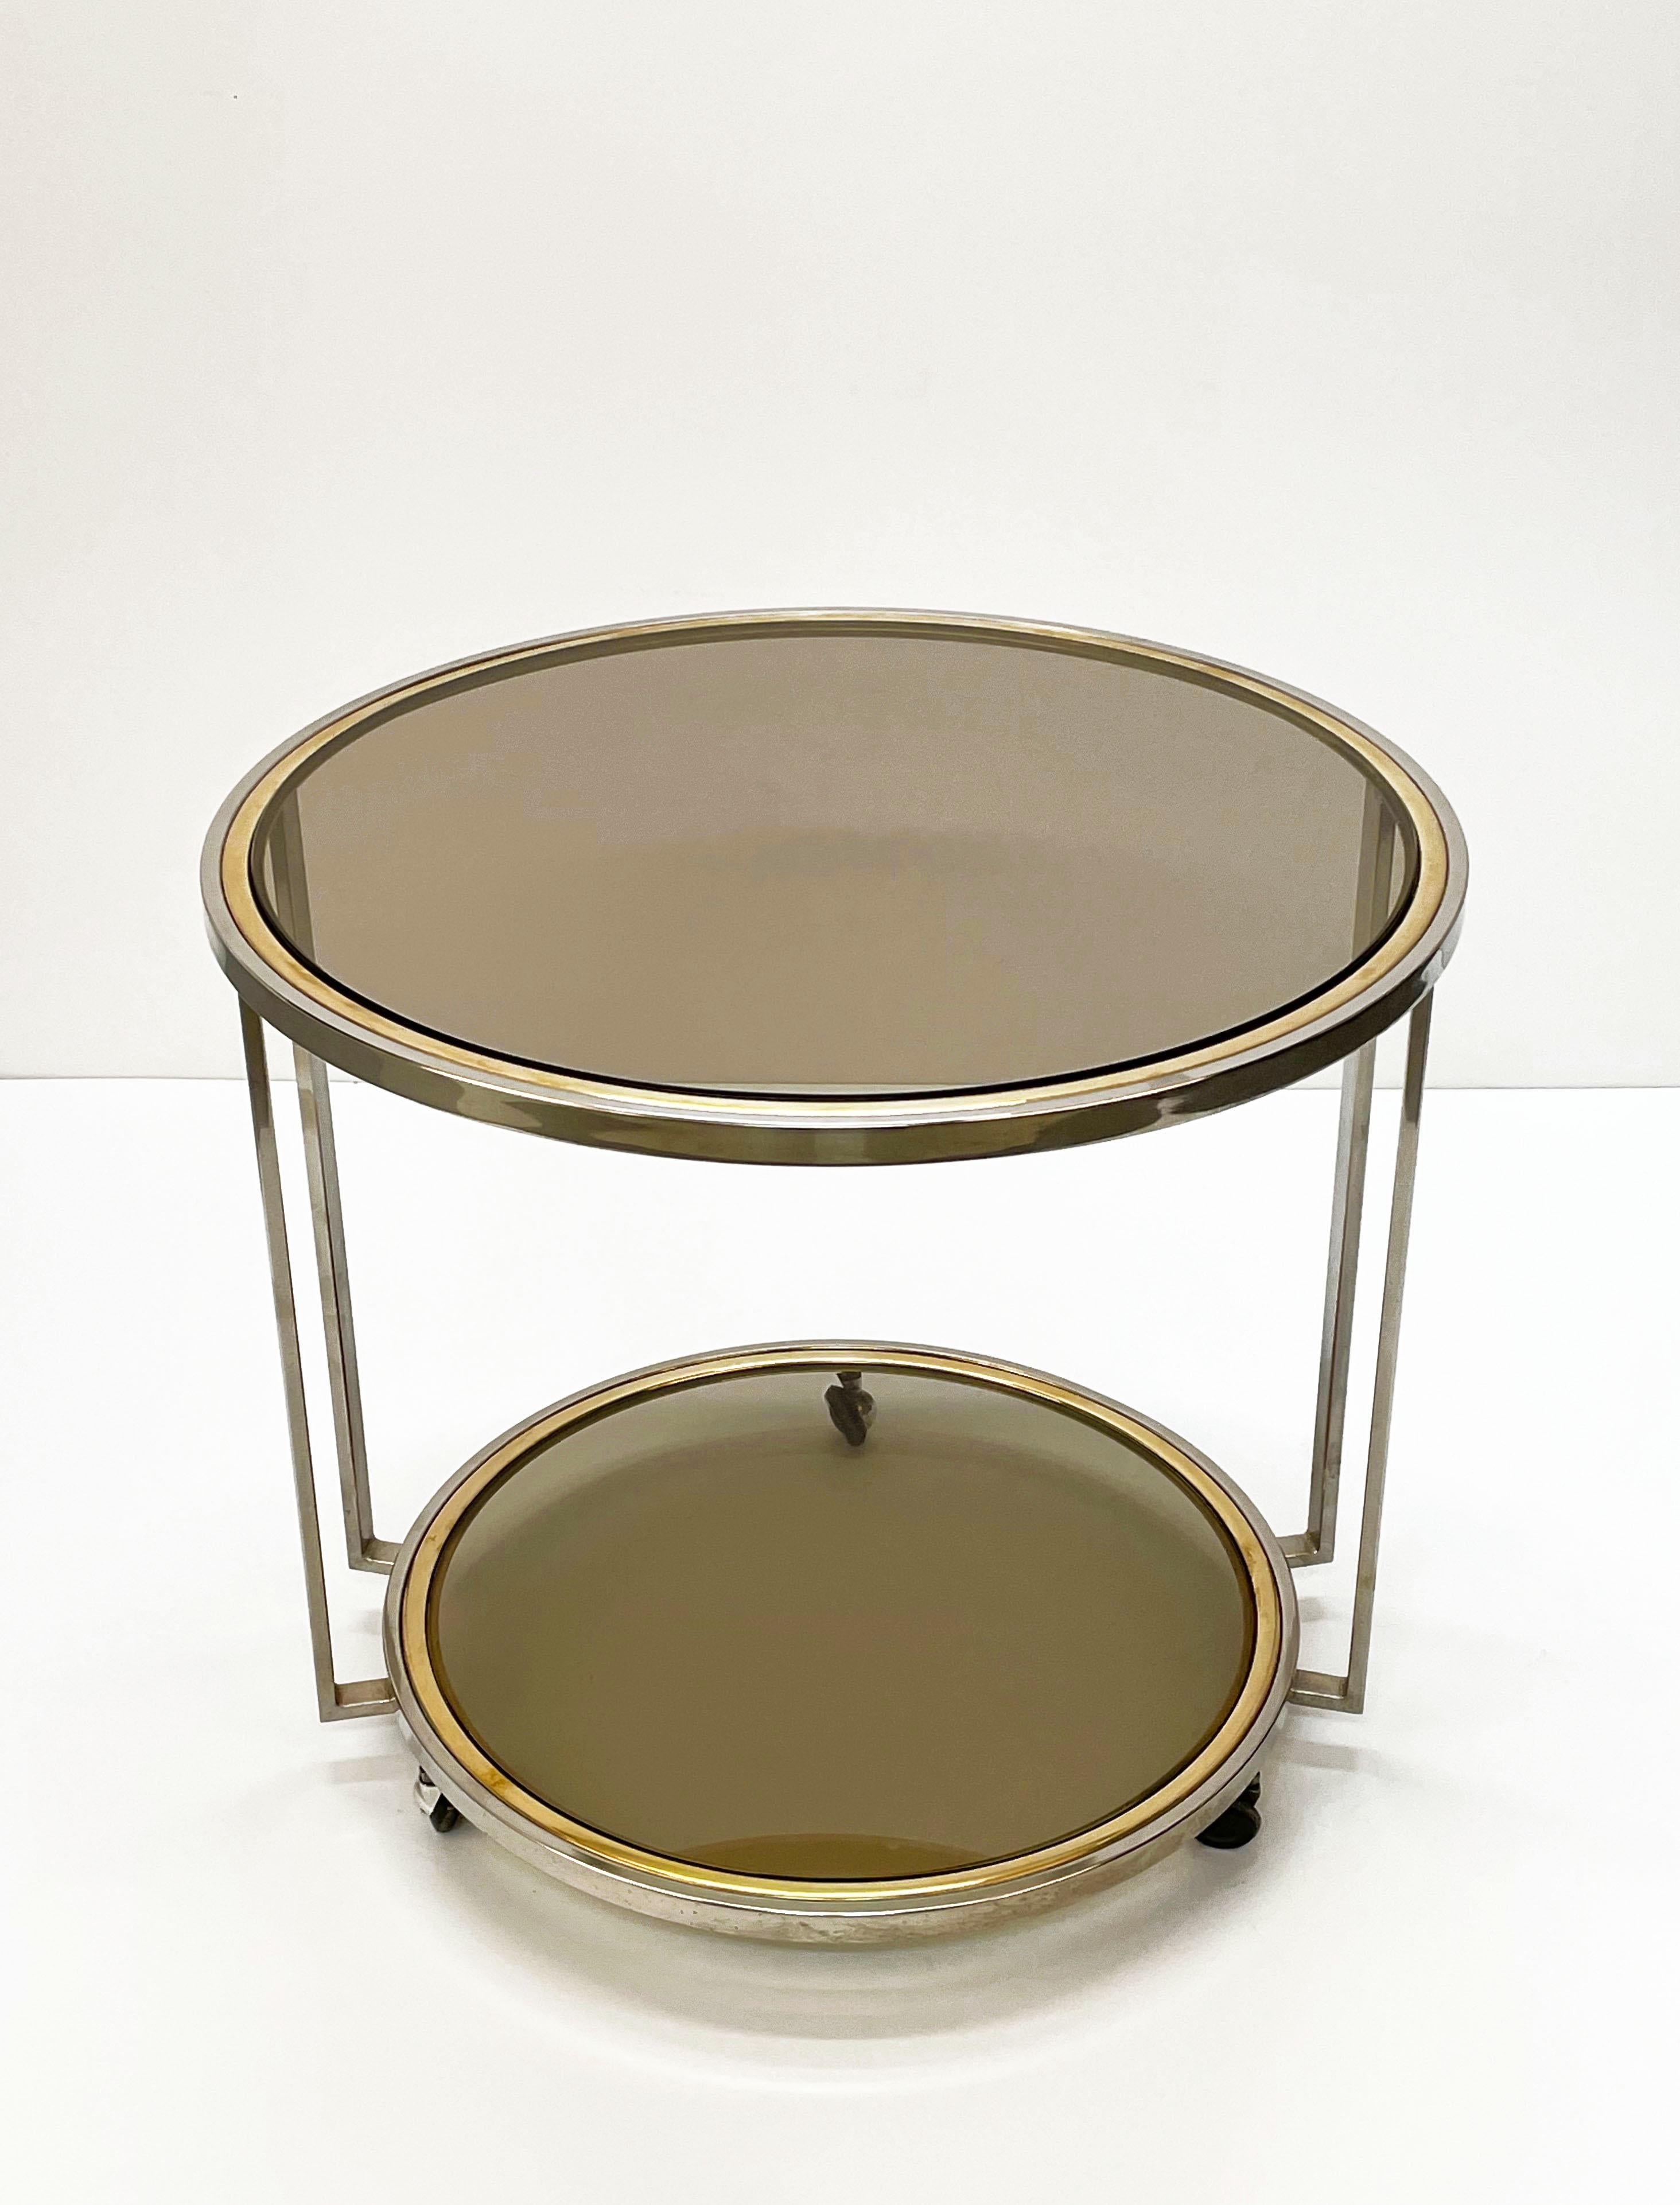 Midcentury Brass and Chrome and Glass Italian Coffee Table after Romeo Rega 1970 For Sale 2